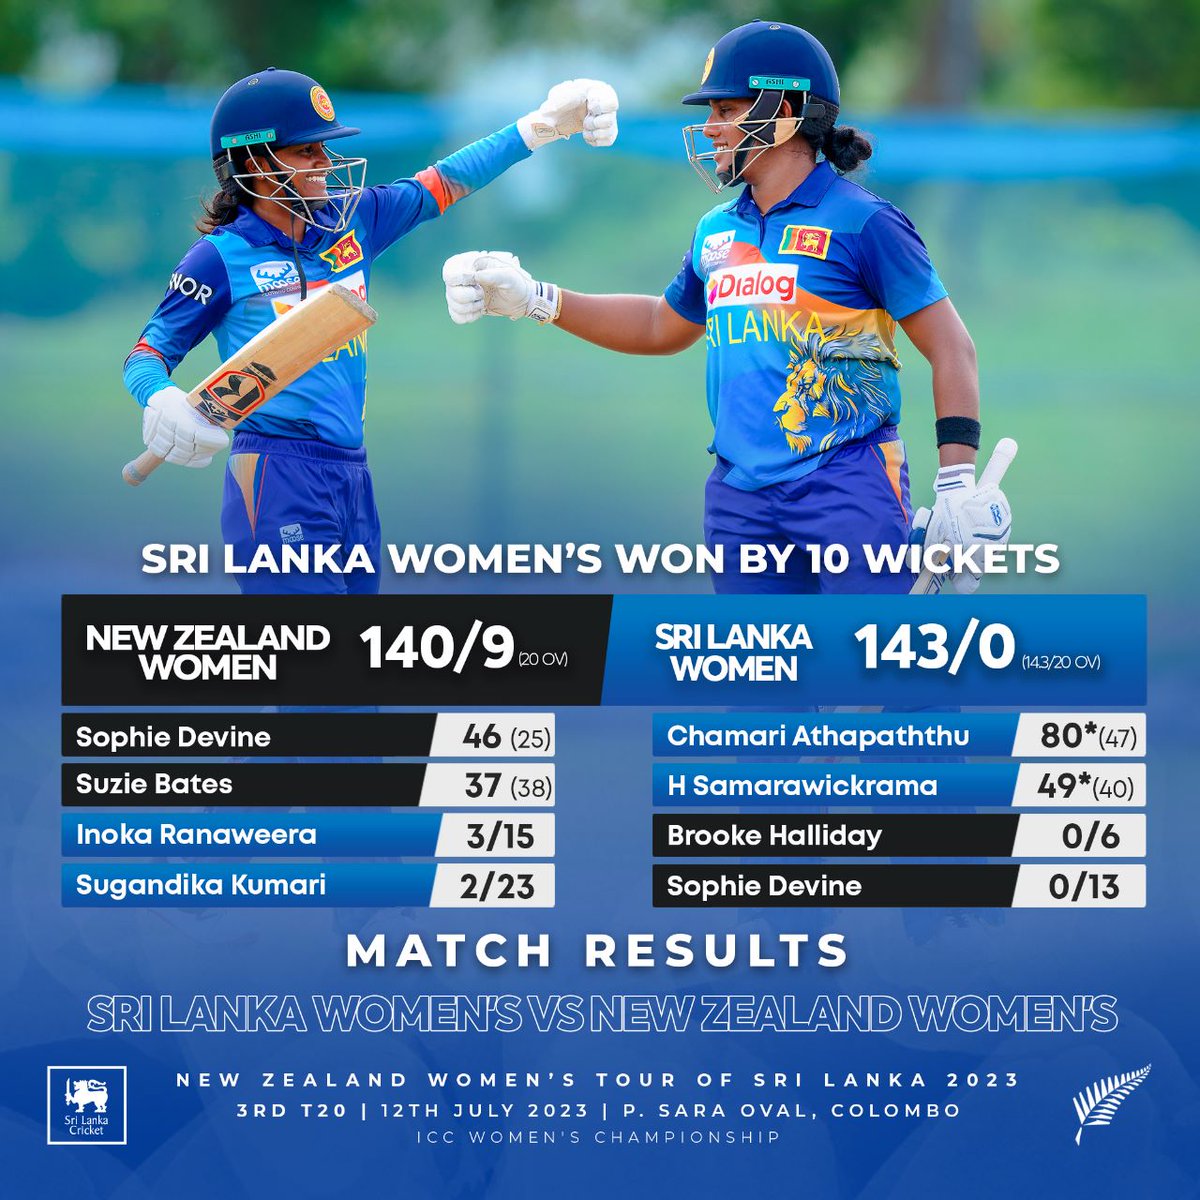 What a thrilling end to an incredible series! Sri Lanka dominates today's match against New Zealand, securing a sensational 10-wicket victory. 🎉 #LionessRoar 

This remarkable win marks the first time Sri Lanka has defeated New Zealand in T20I cricket. 🎊

🇳🇿 New Zealand emerged…